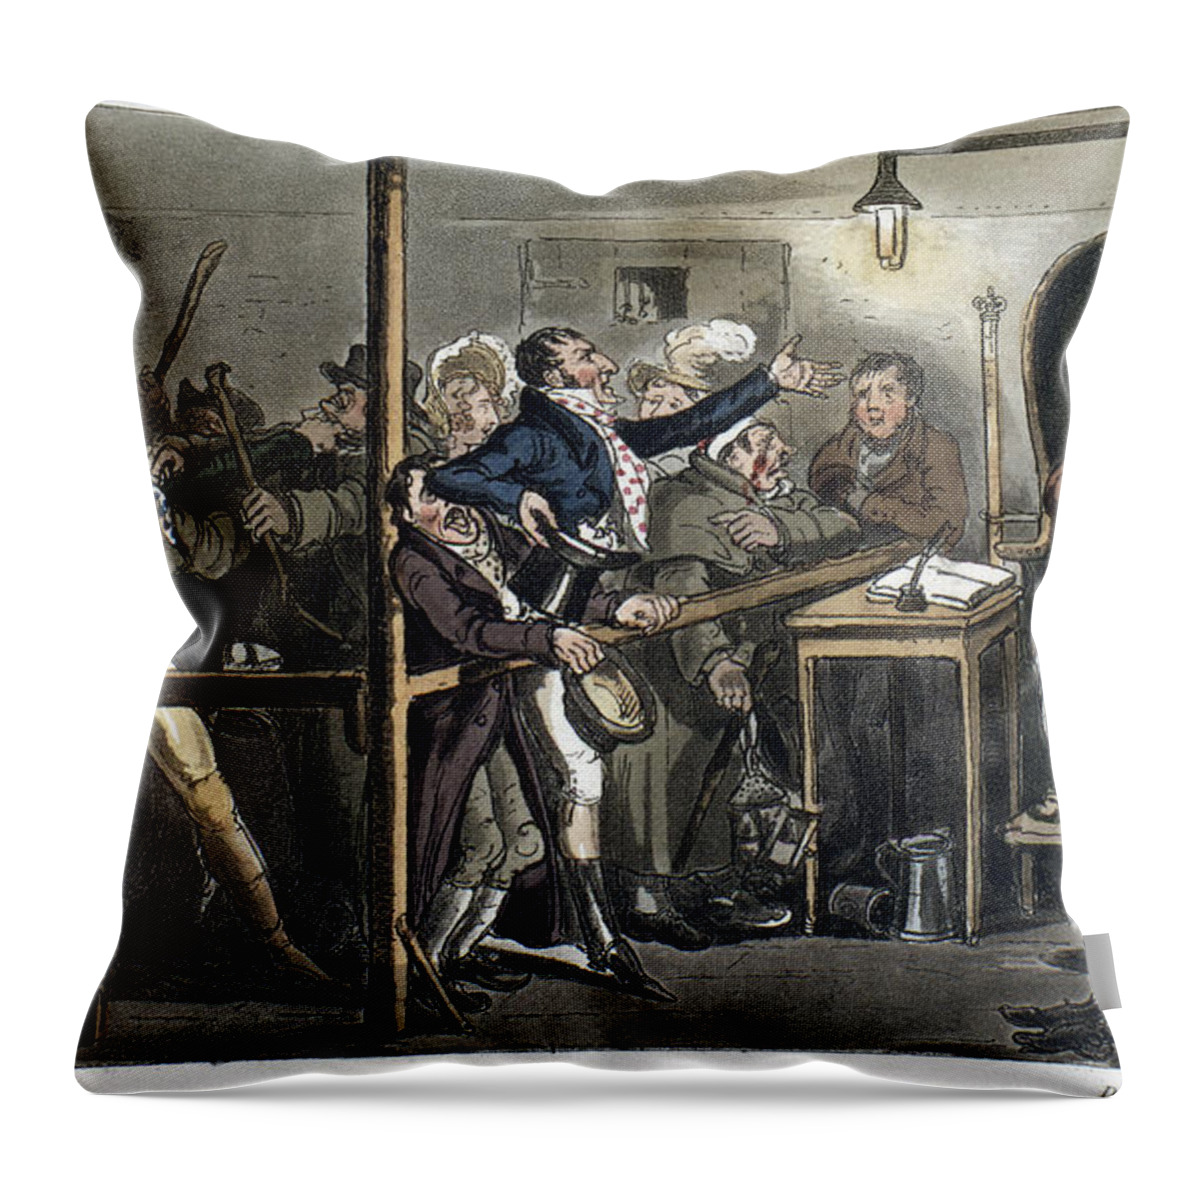 1821 Throw Pillow featuring the painting London Courtroom, 1821 by Granger